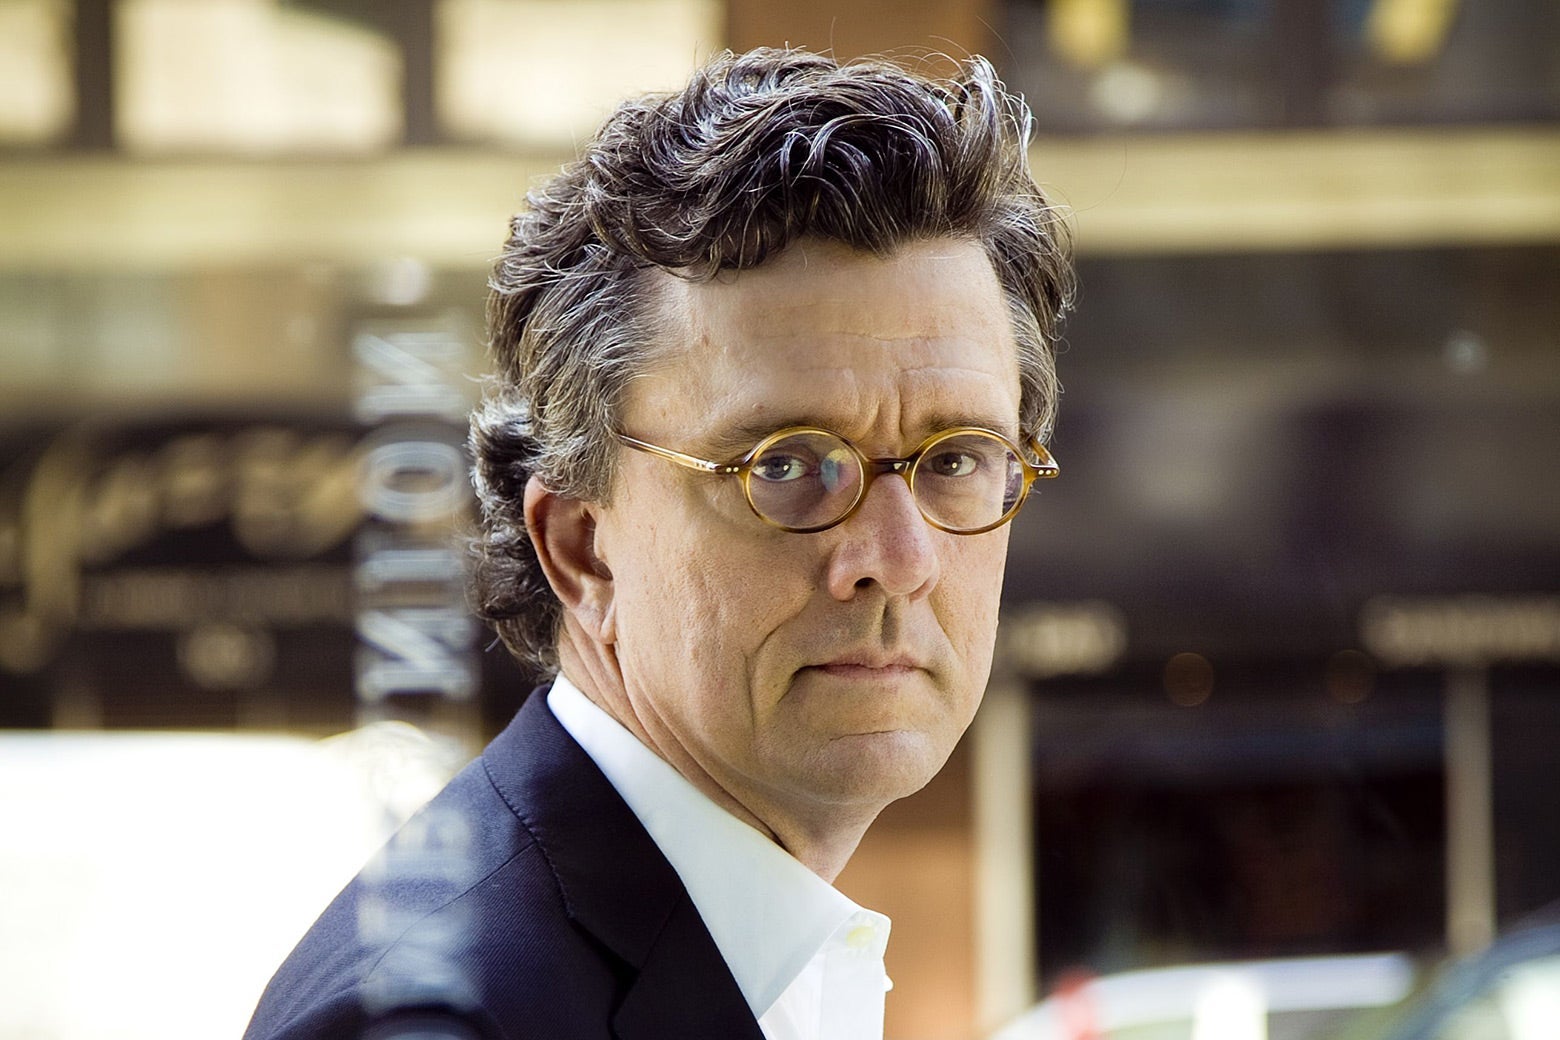 A middle-aged white man with small glasses and curly hair.